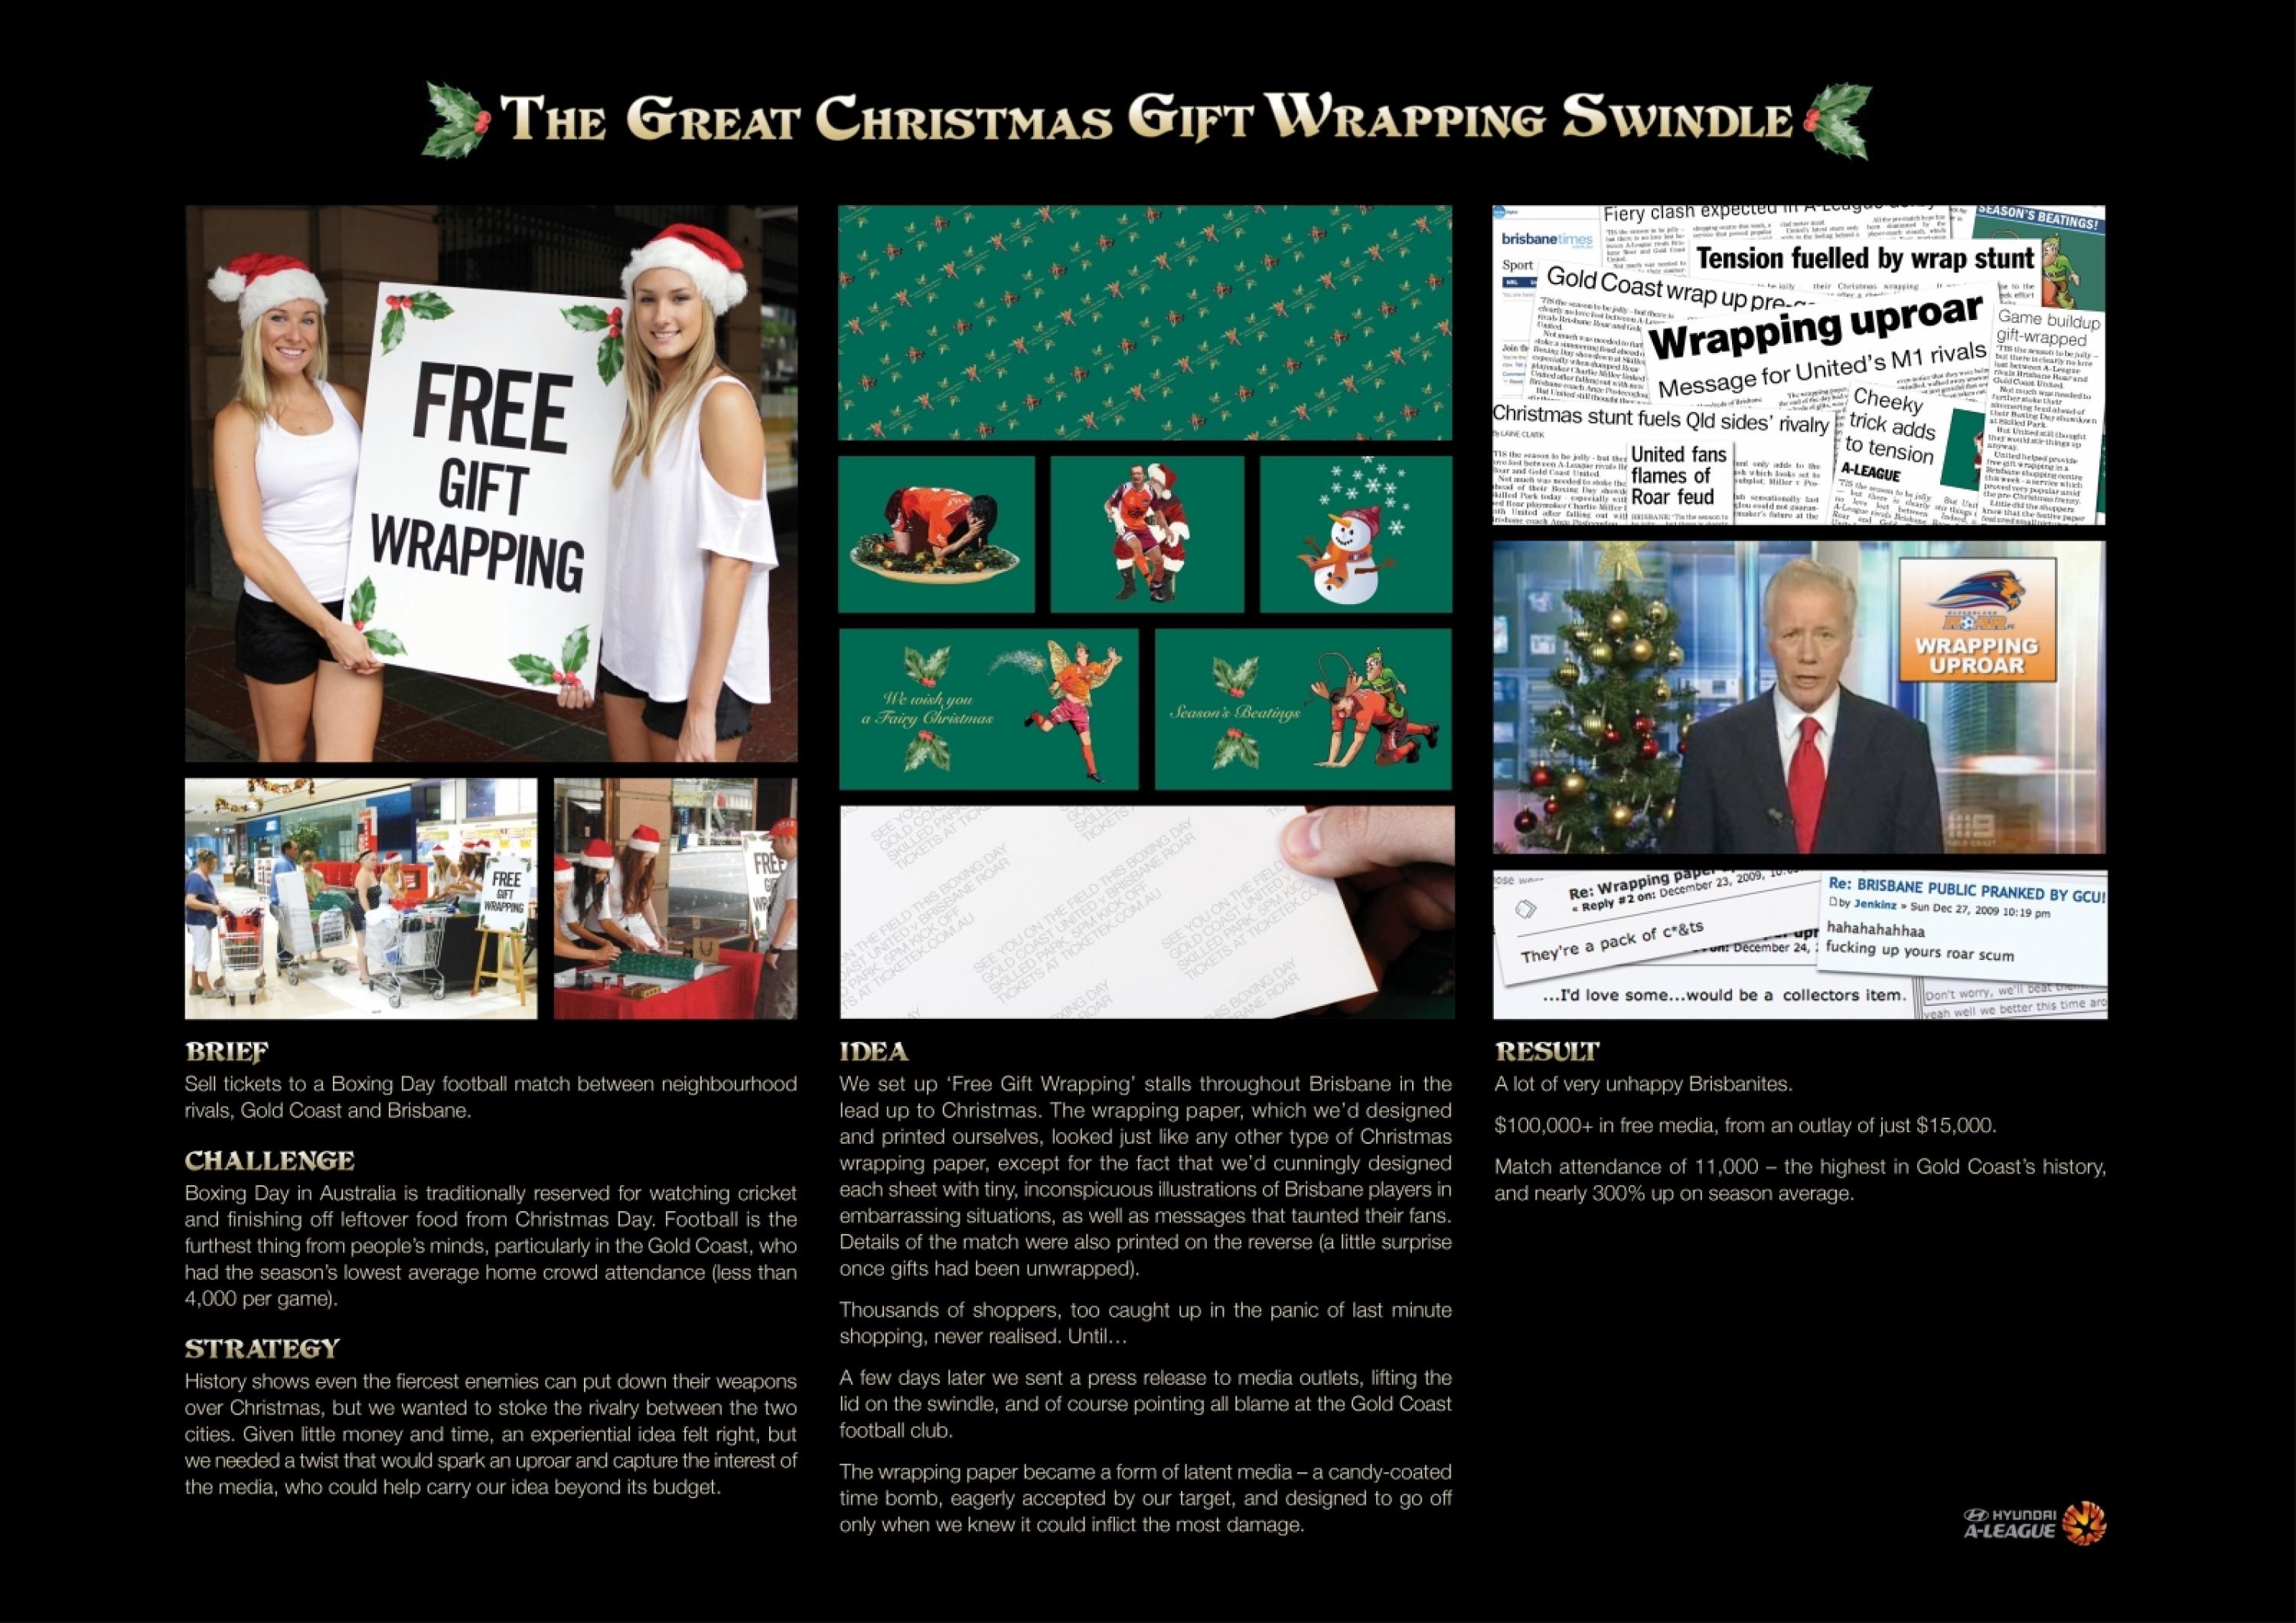 THE GREAT CHRISTMAS WRAPPING PAPER SWINDLE